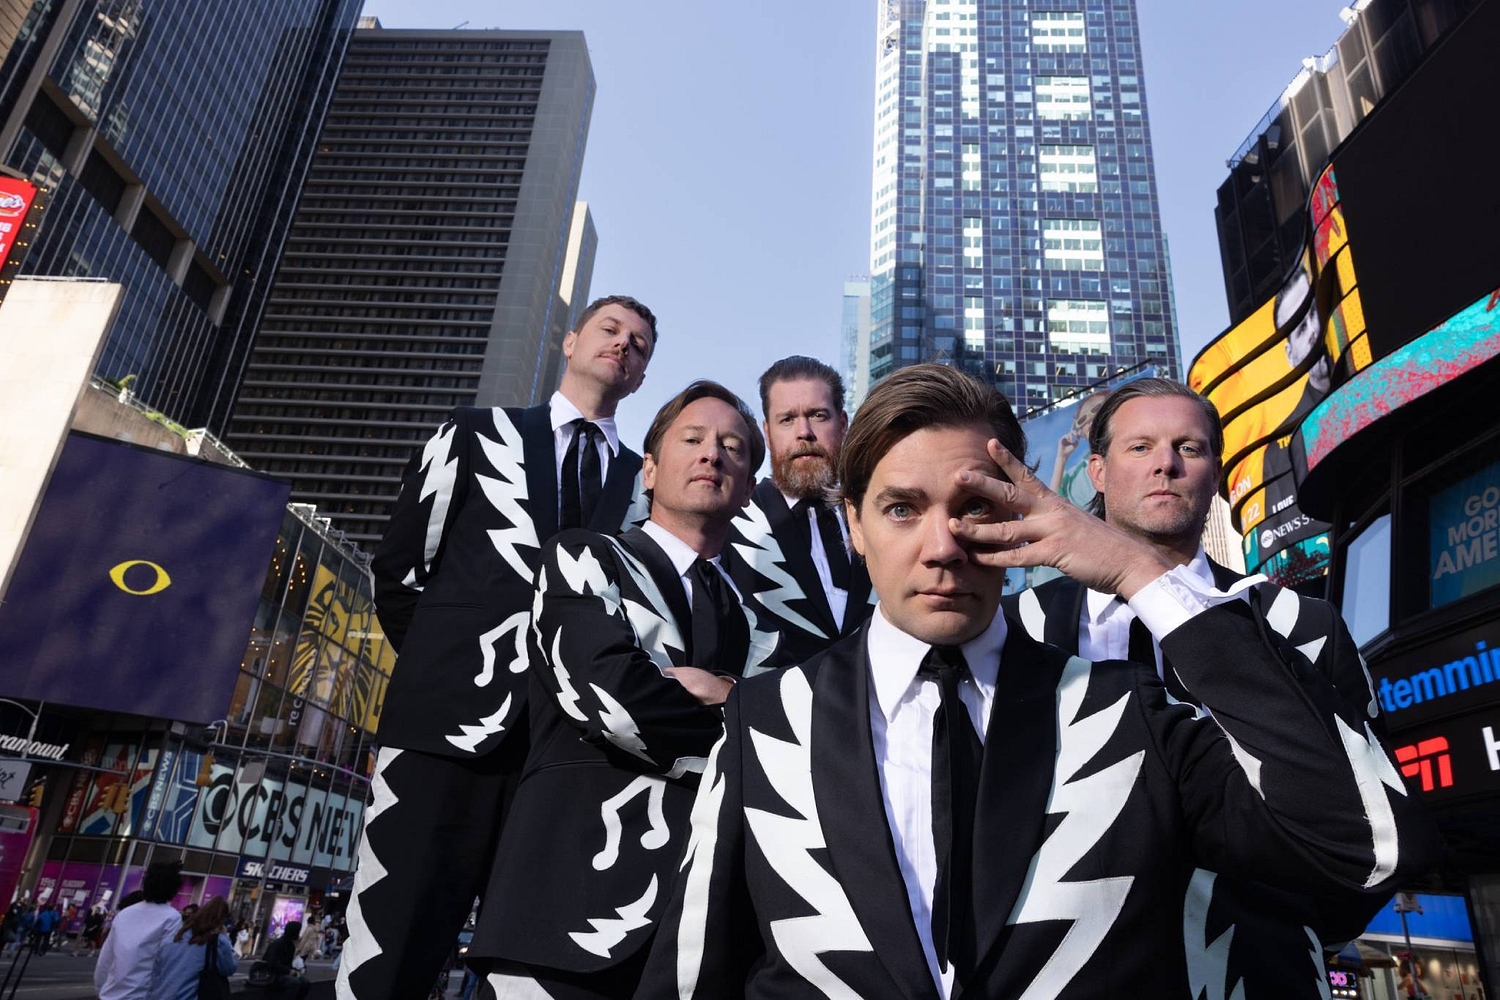 The Hives - The Death Of Randy Fitzsimmons